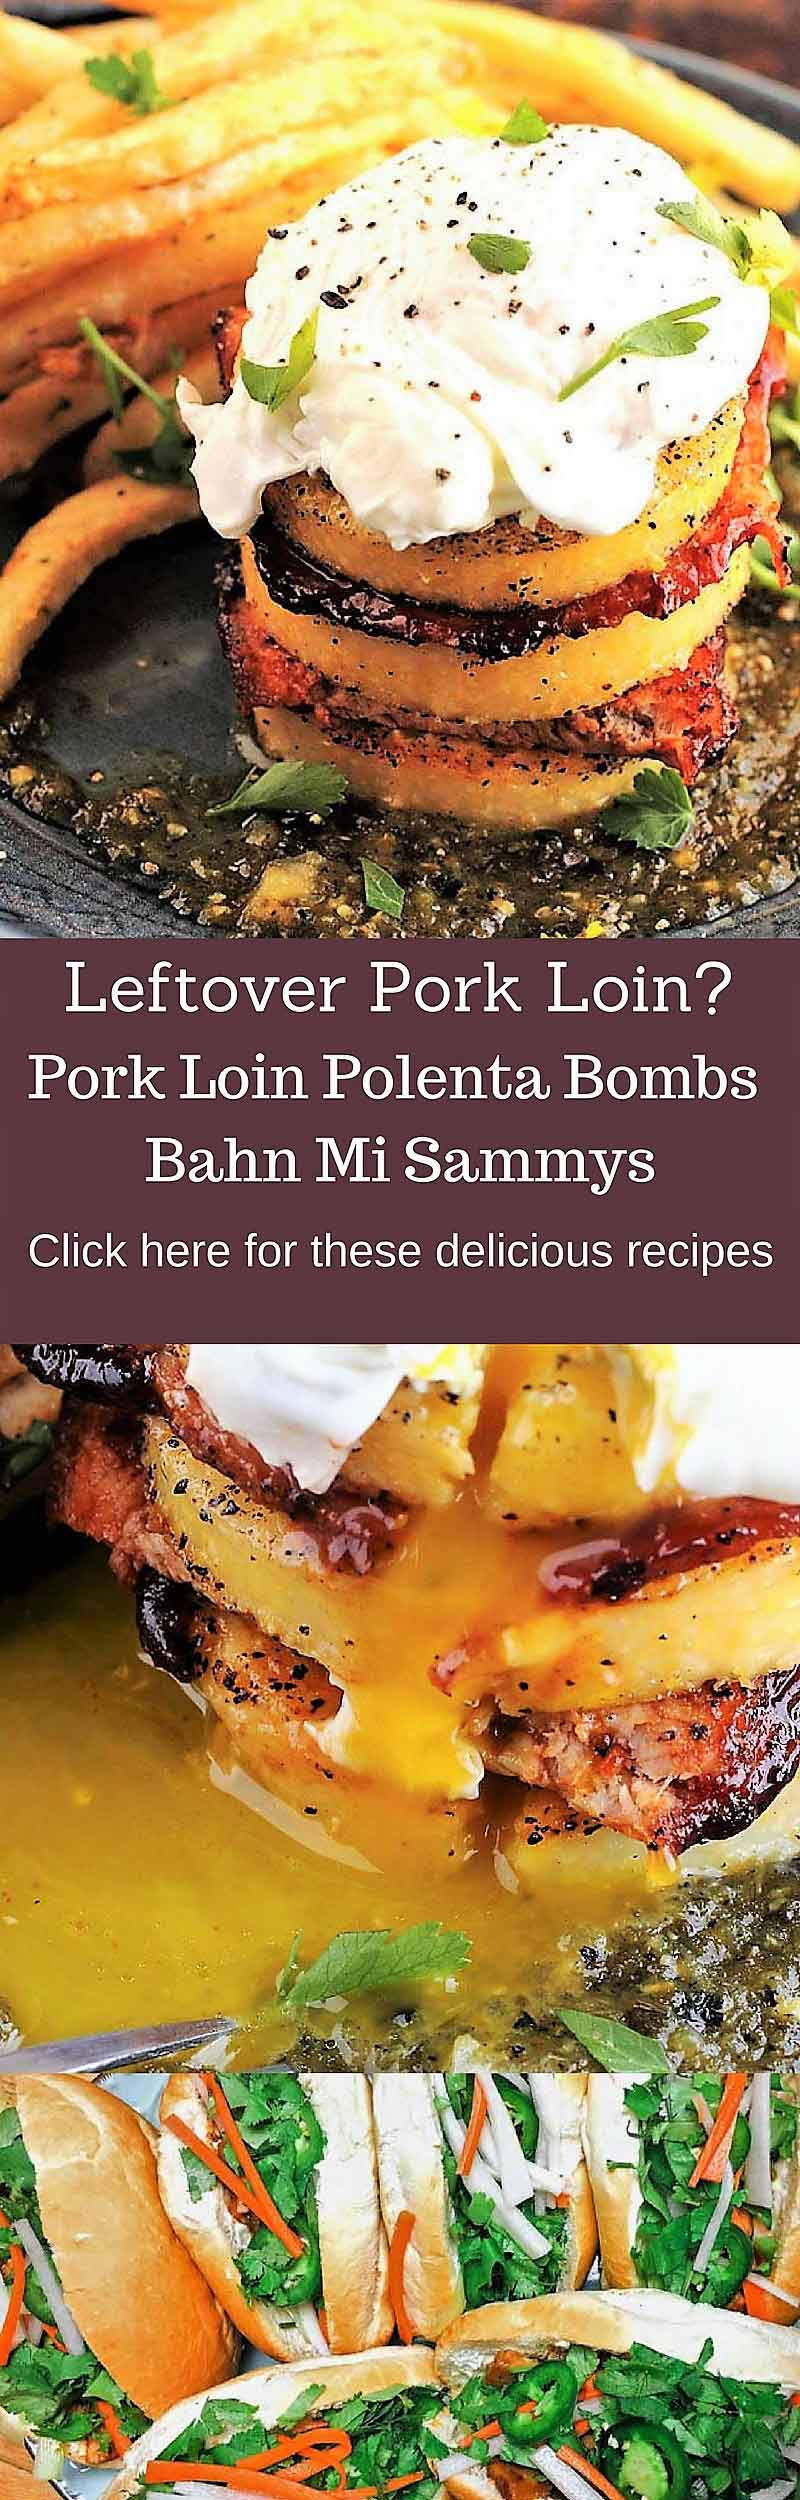 Leftover Pork Loin and What To Do With It | Oven Struck